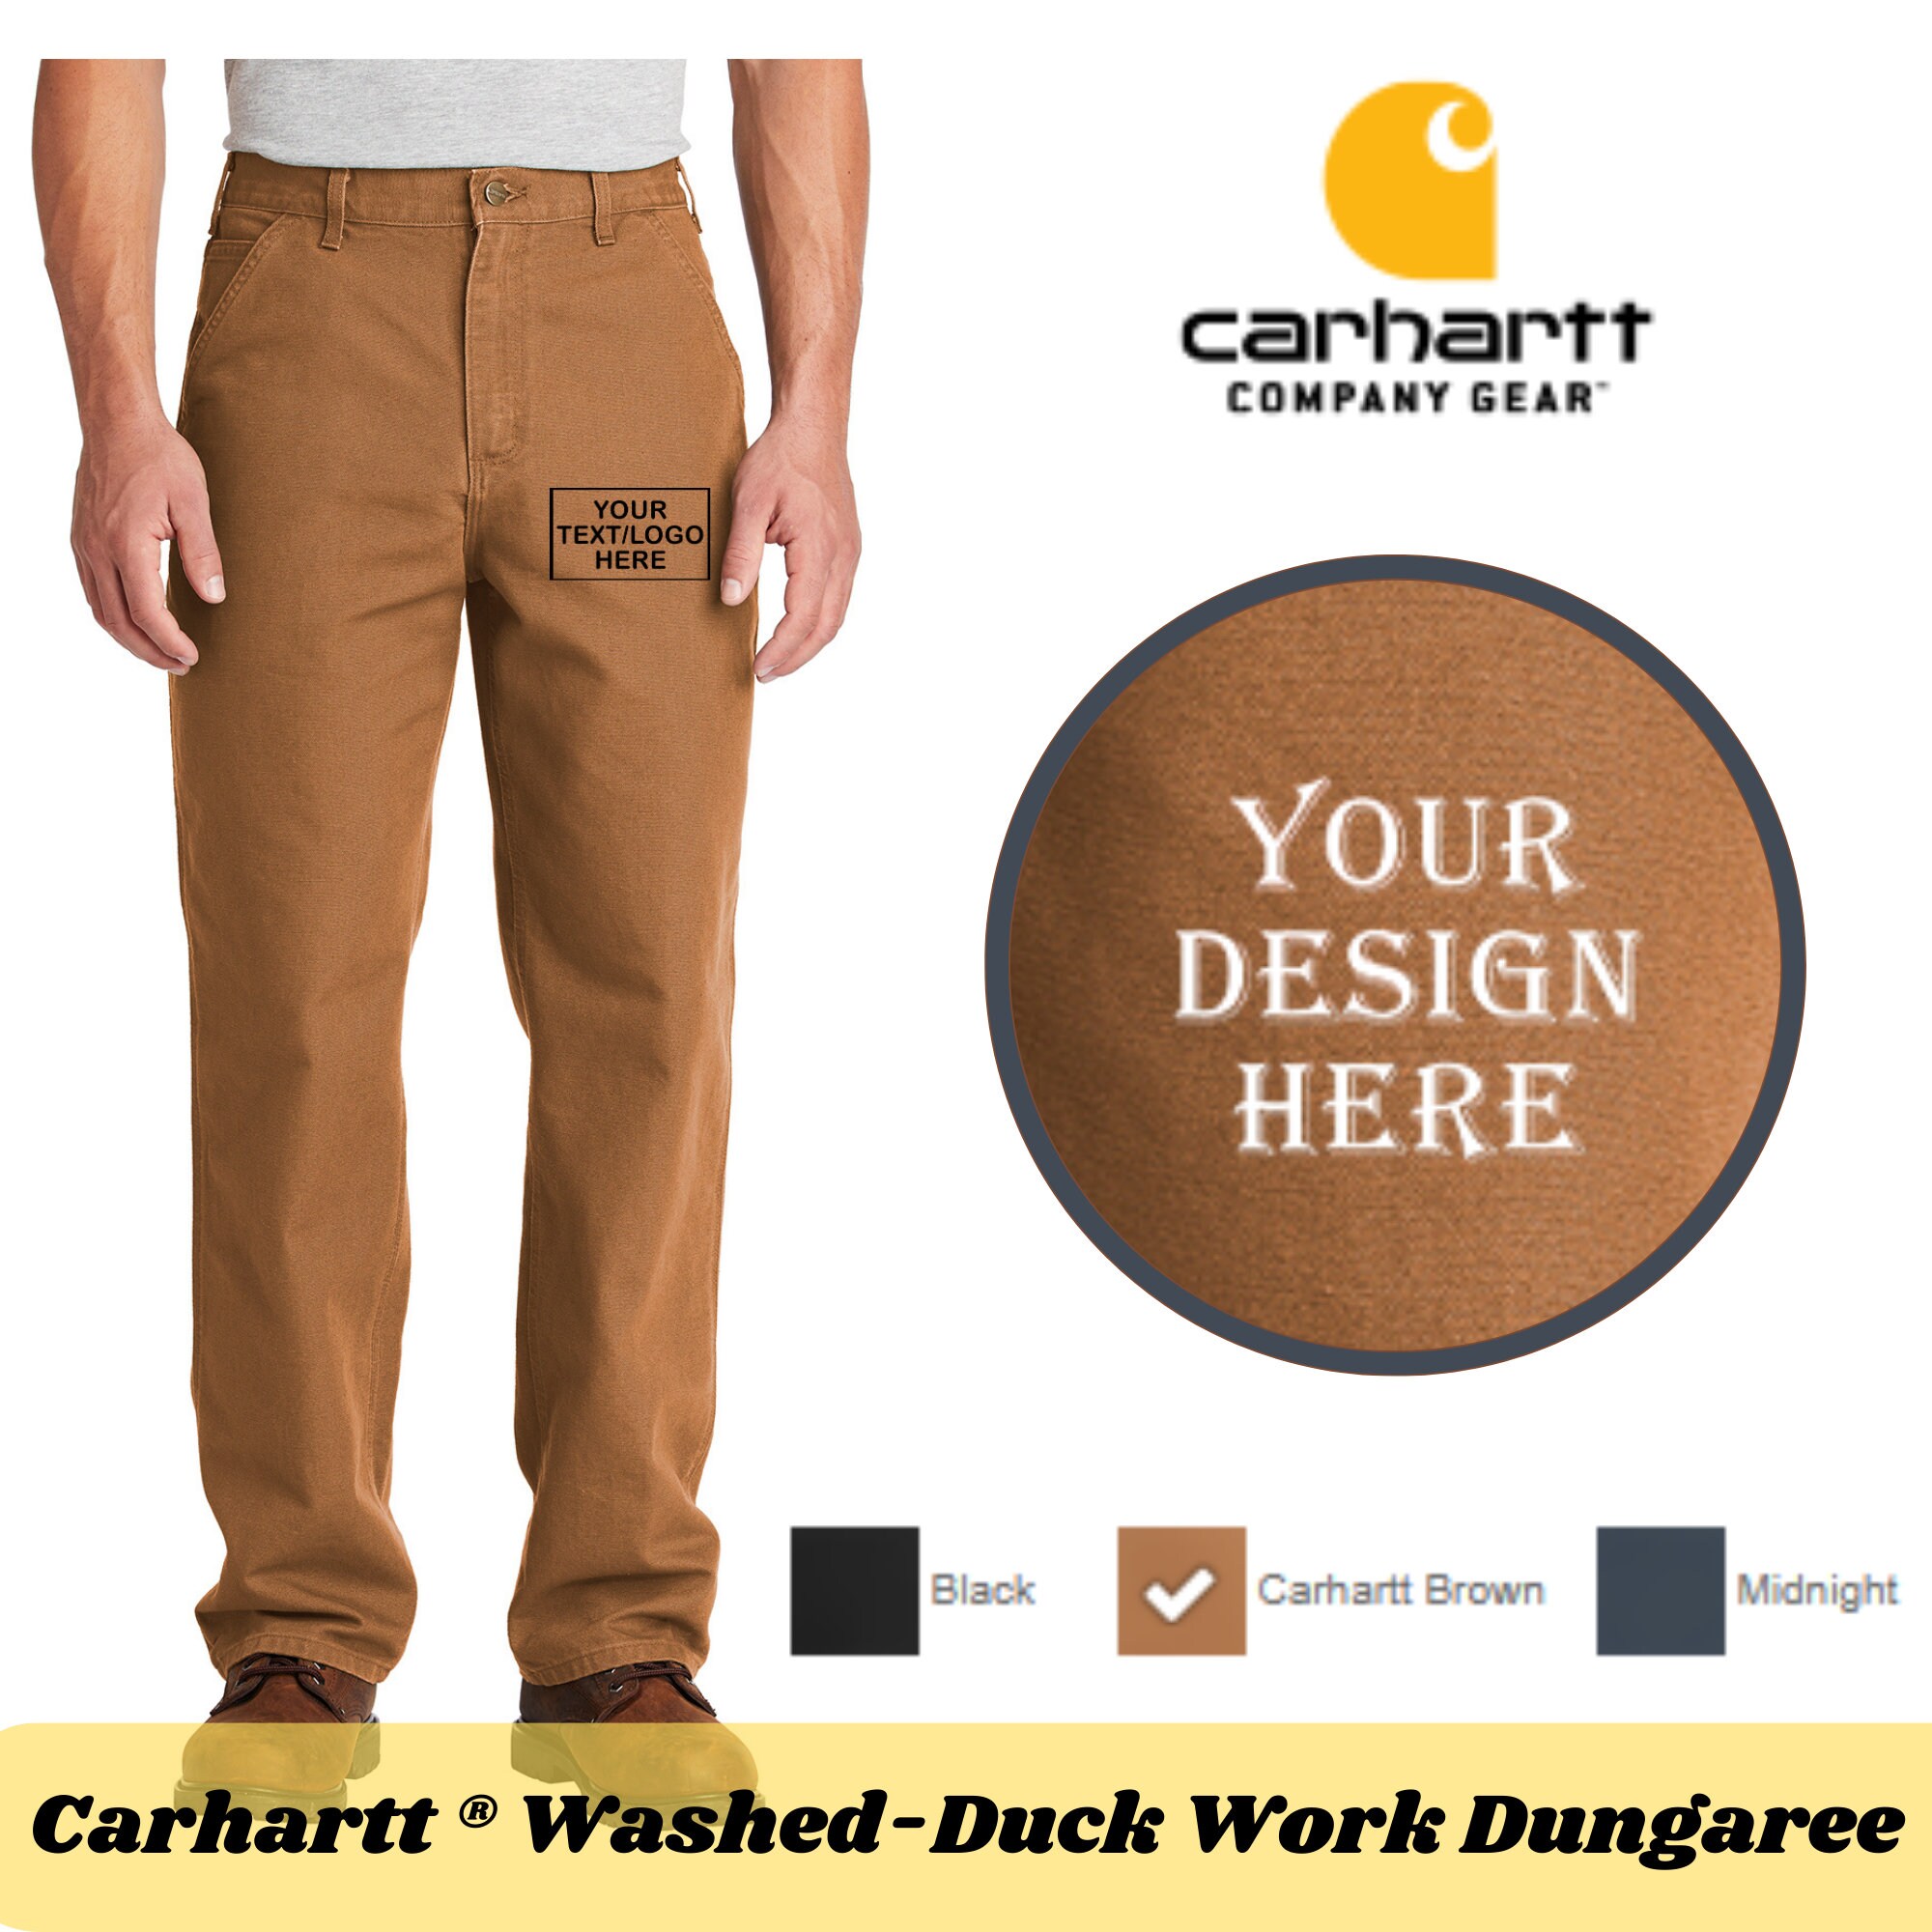 Carhartt Men&s Washed Twill Dungaree - Relaxed Fit (46x32 Black)